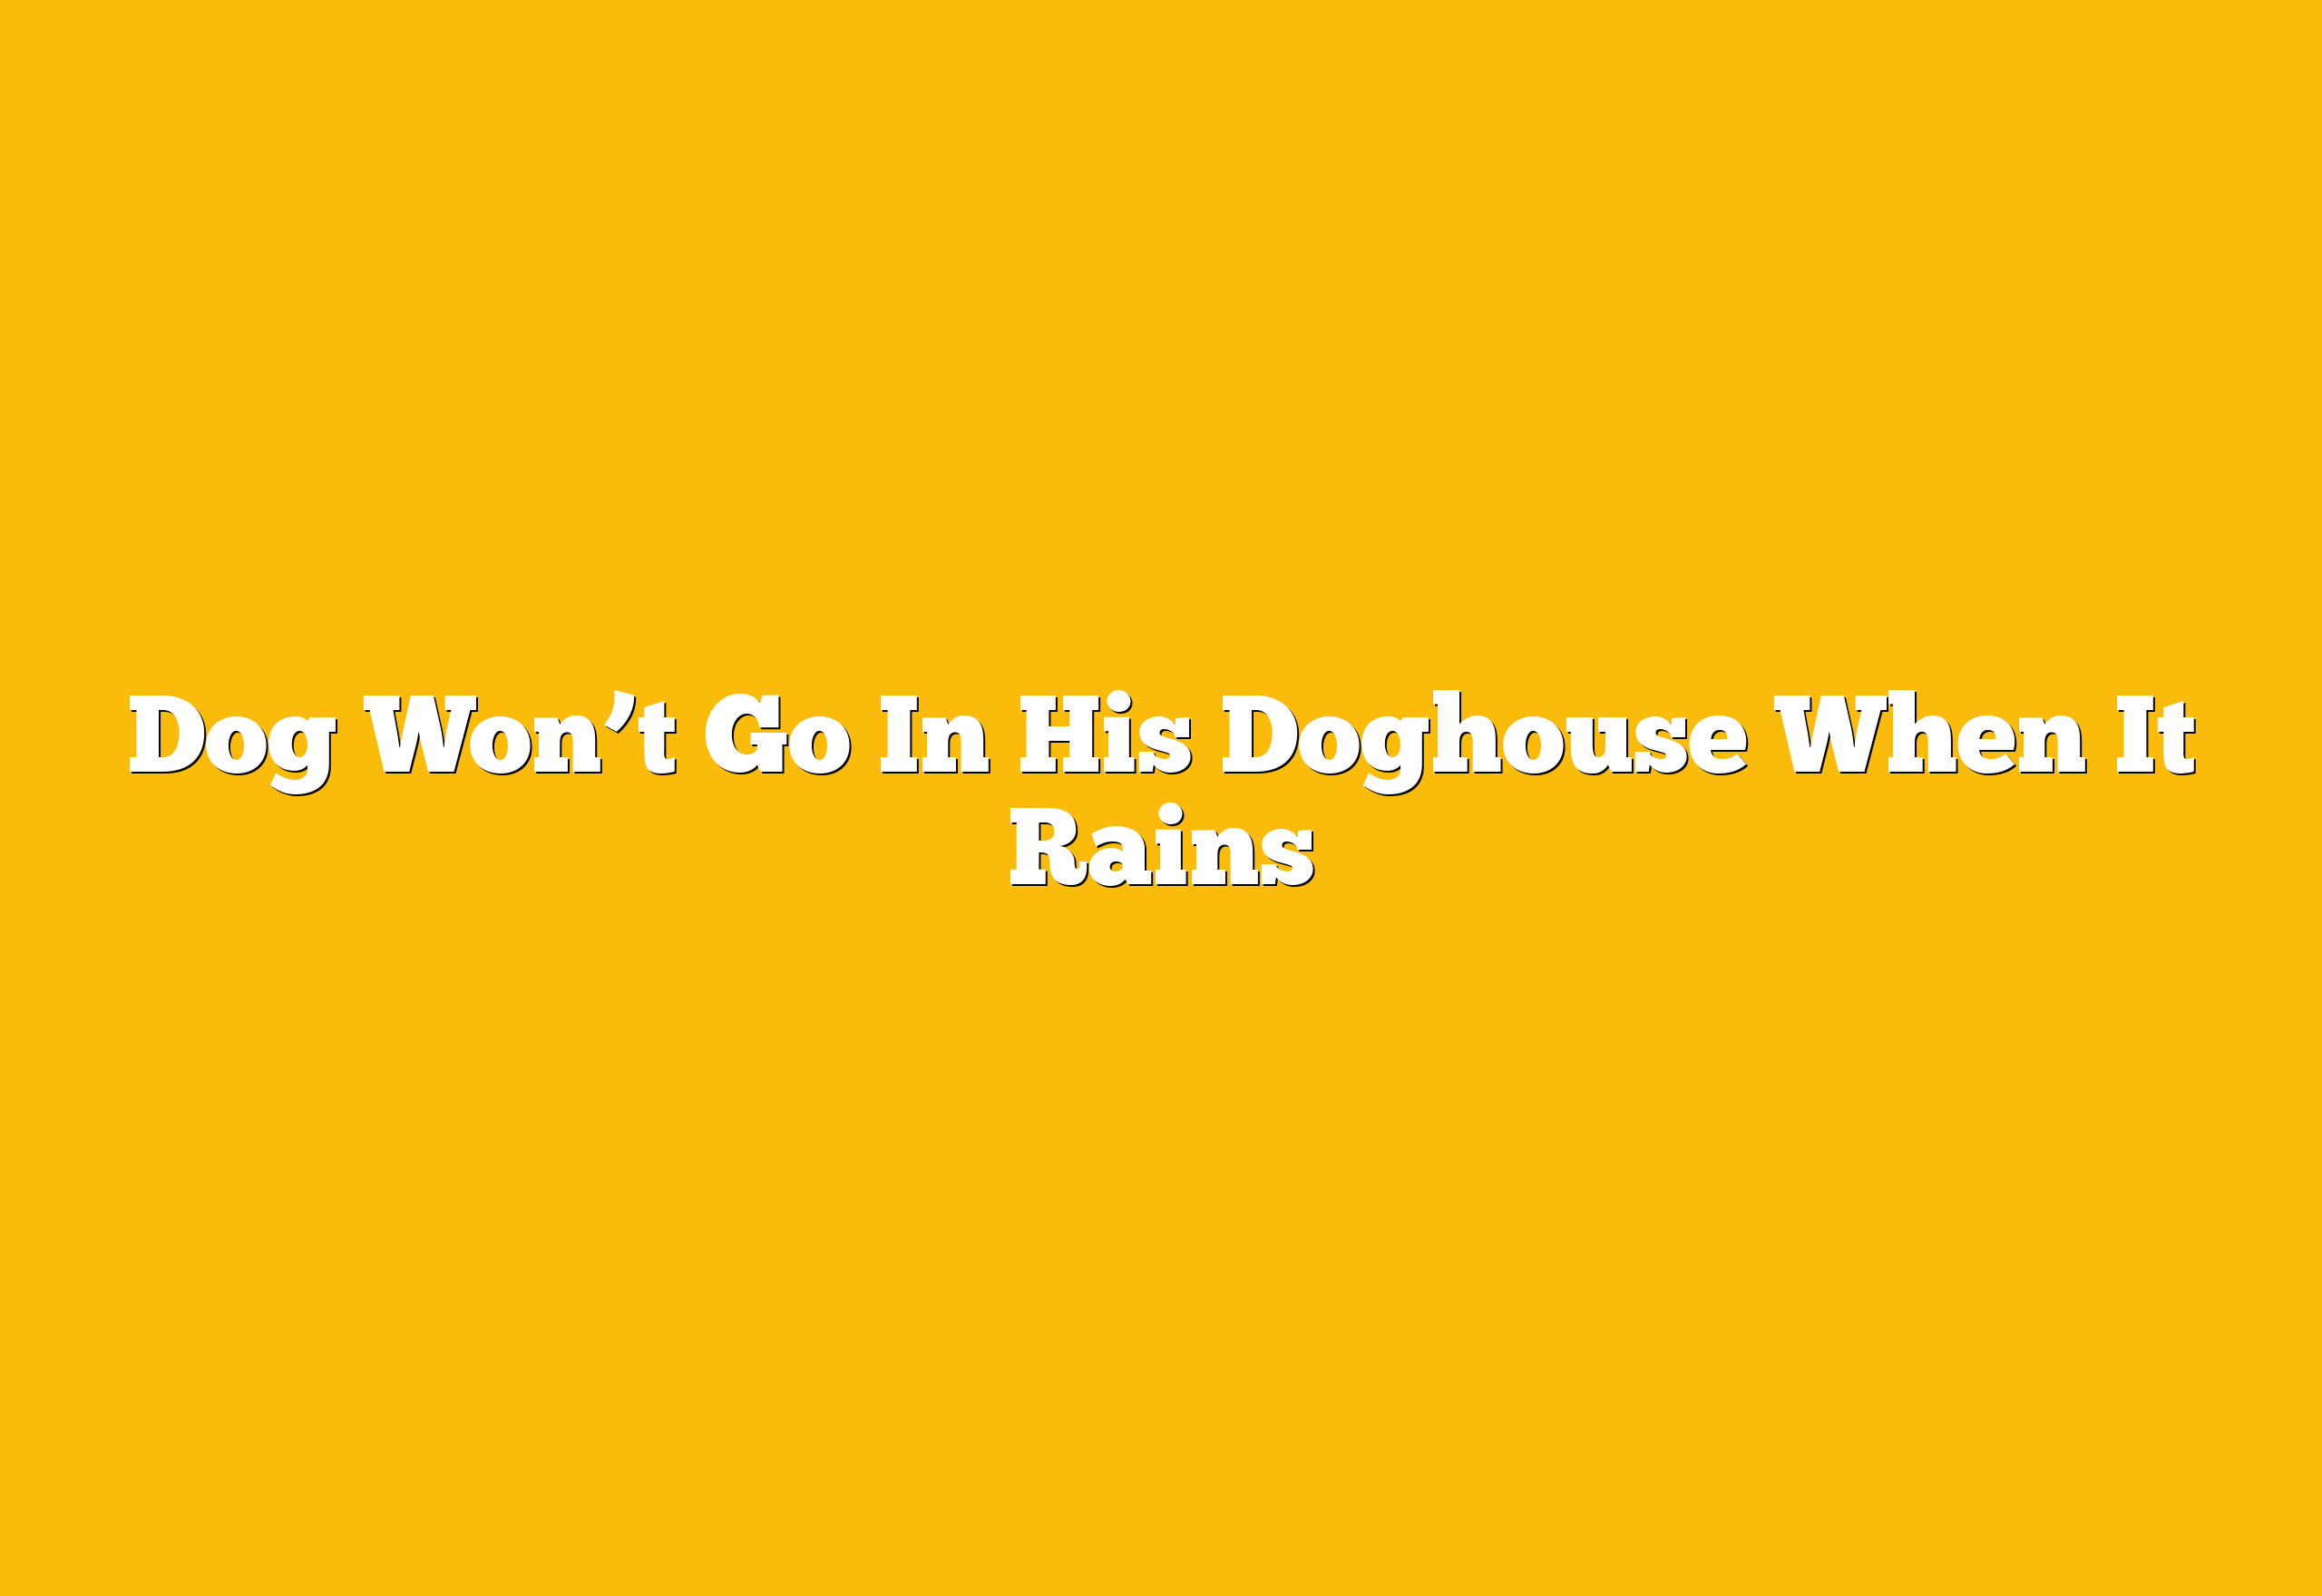 Dog Won’t Go In His Doghouse When It Rains